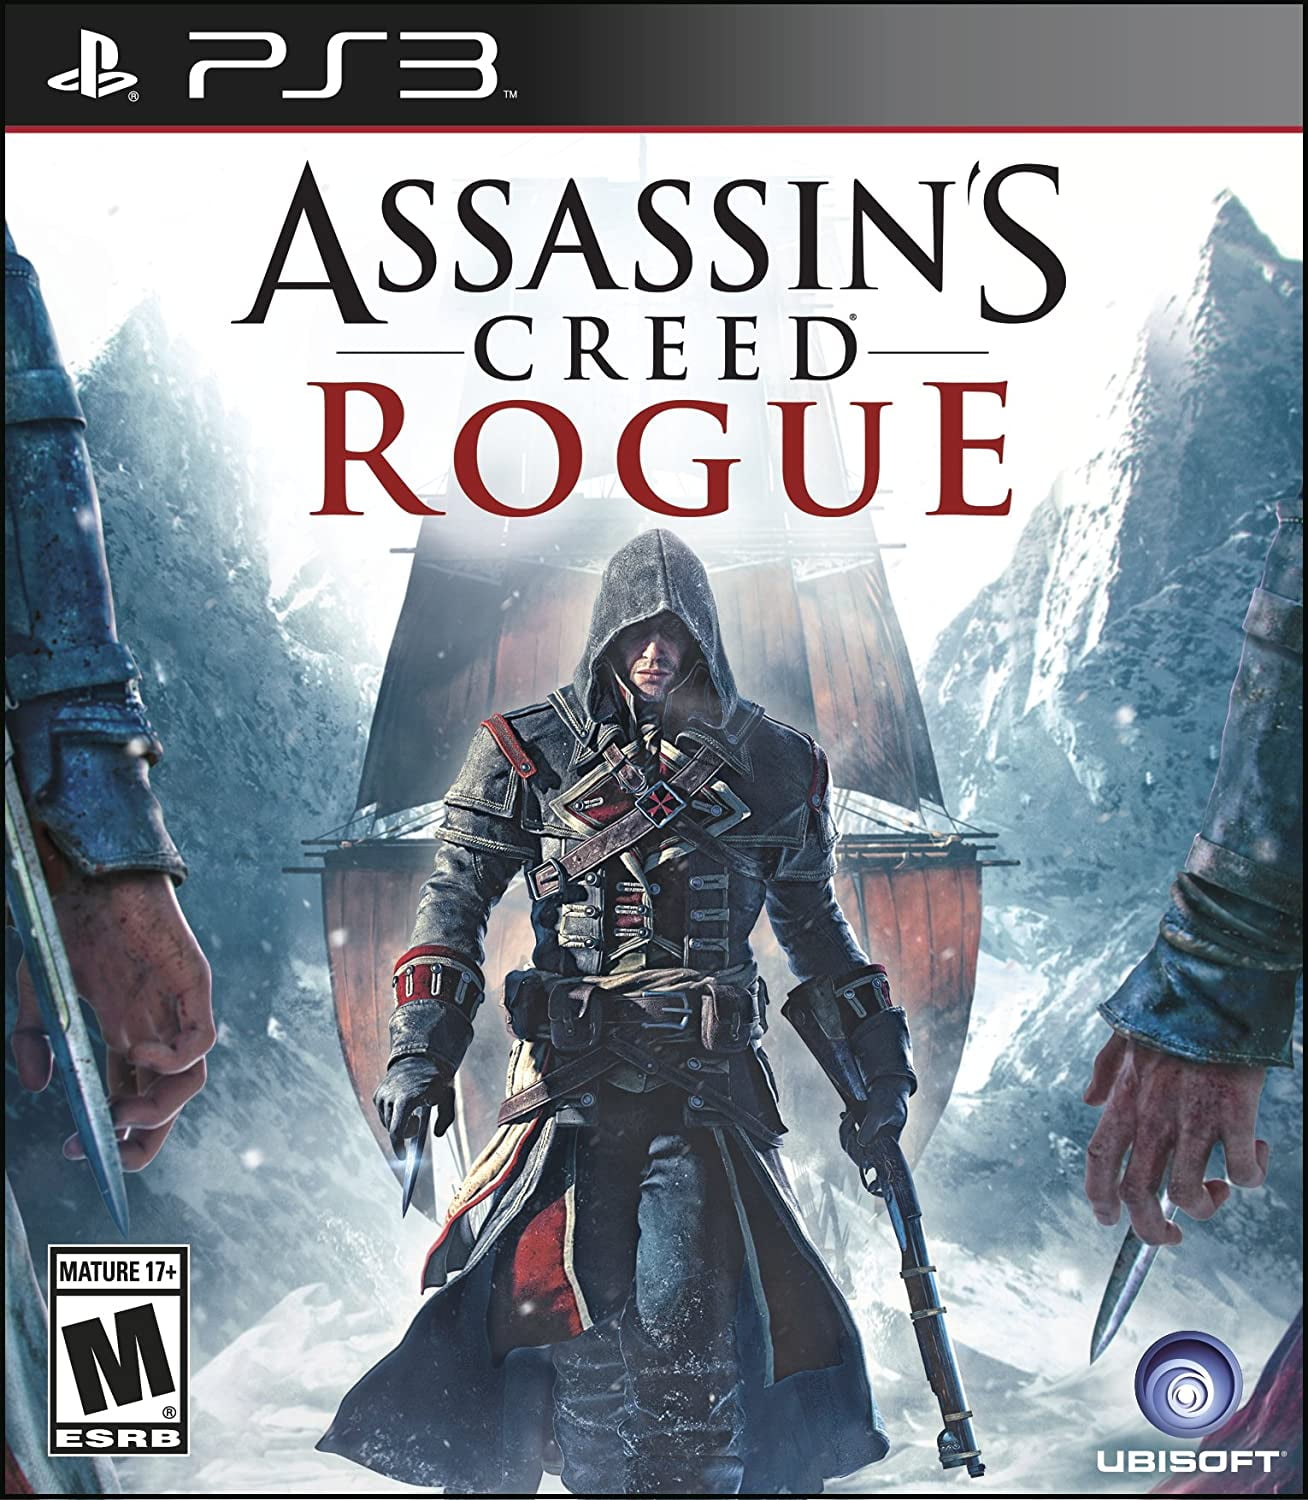 Indica Crónica Antorchas USED Assassin's Creed Rogue- PlayStation 3 - Walmart.com